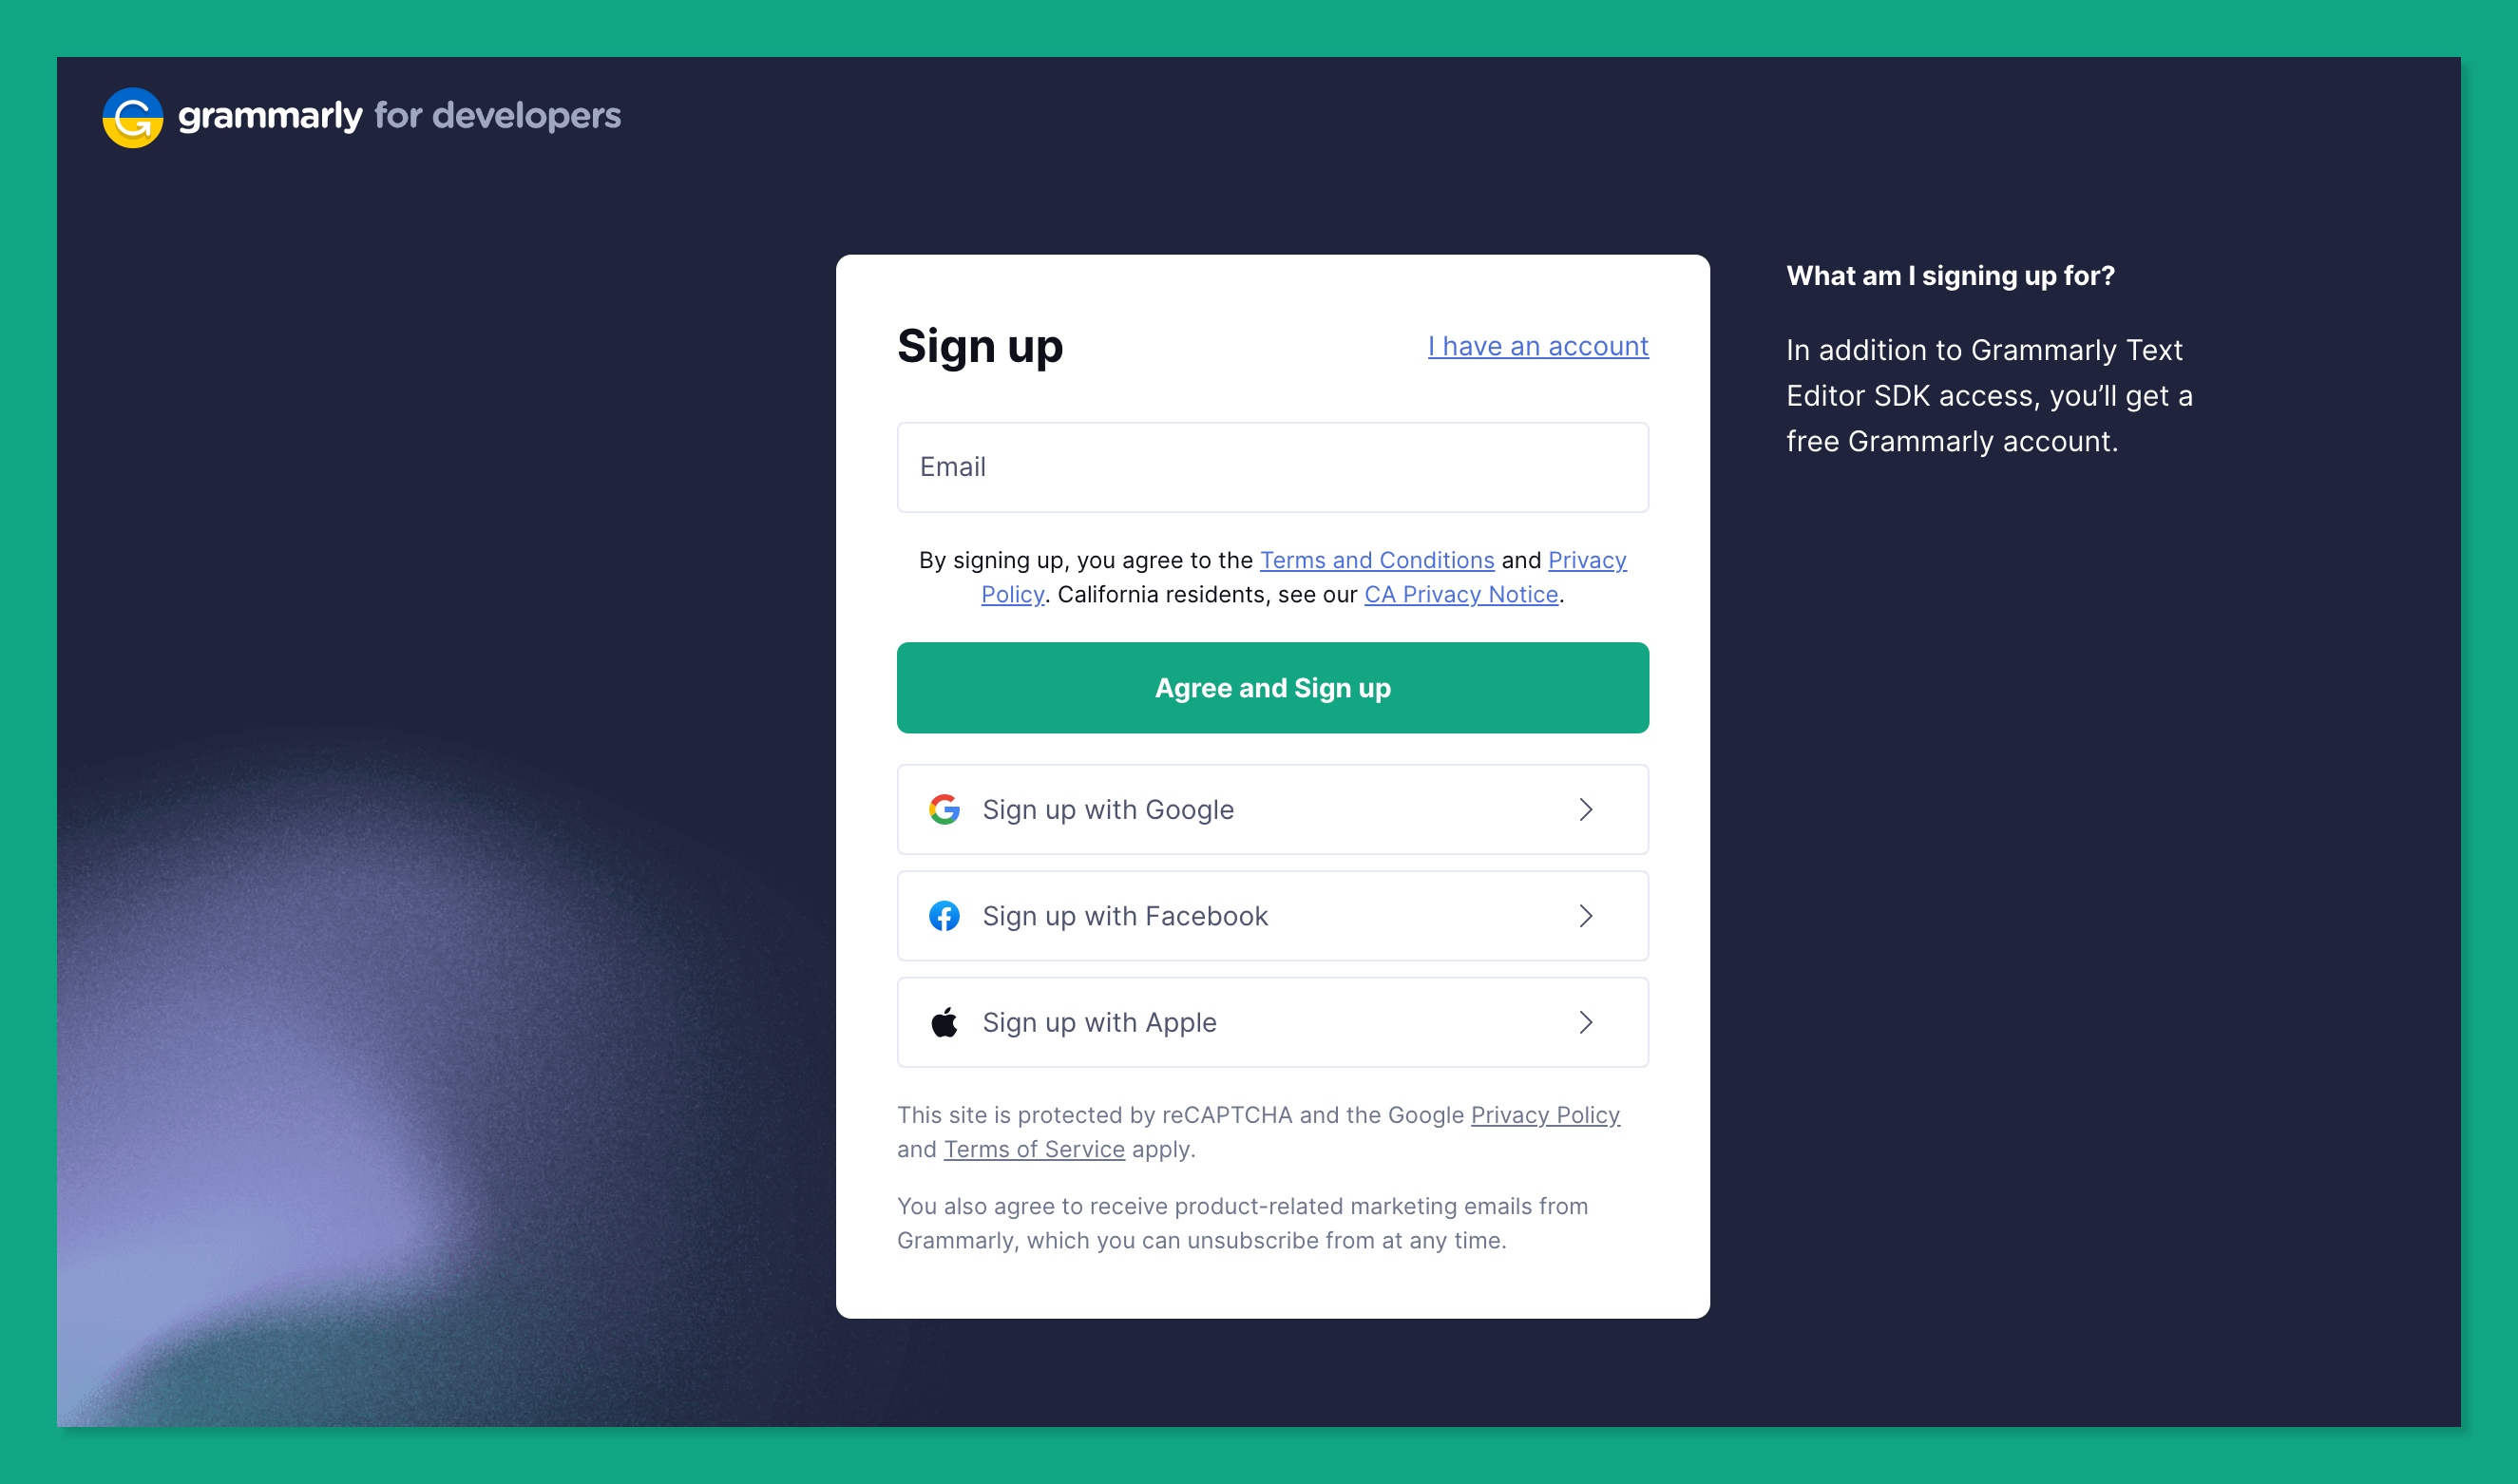 signing up on Grammarly; In addition to Grammarly Text Editor SDK access, youll get a free Grammarly account.